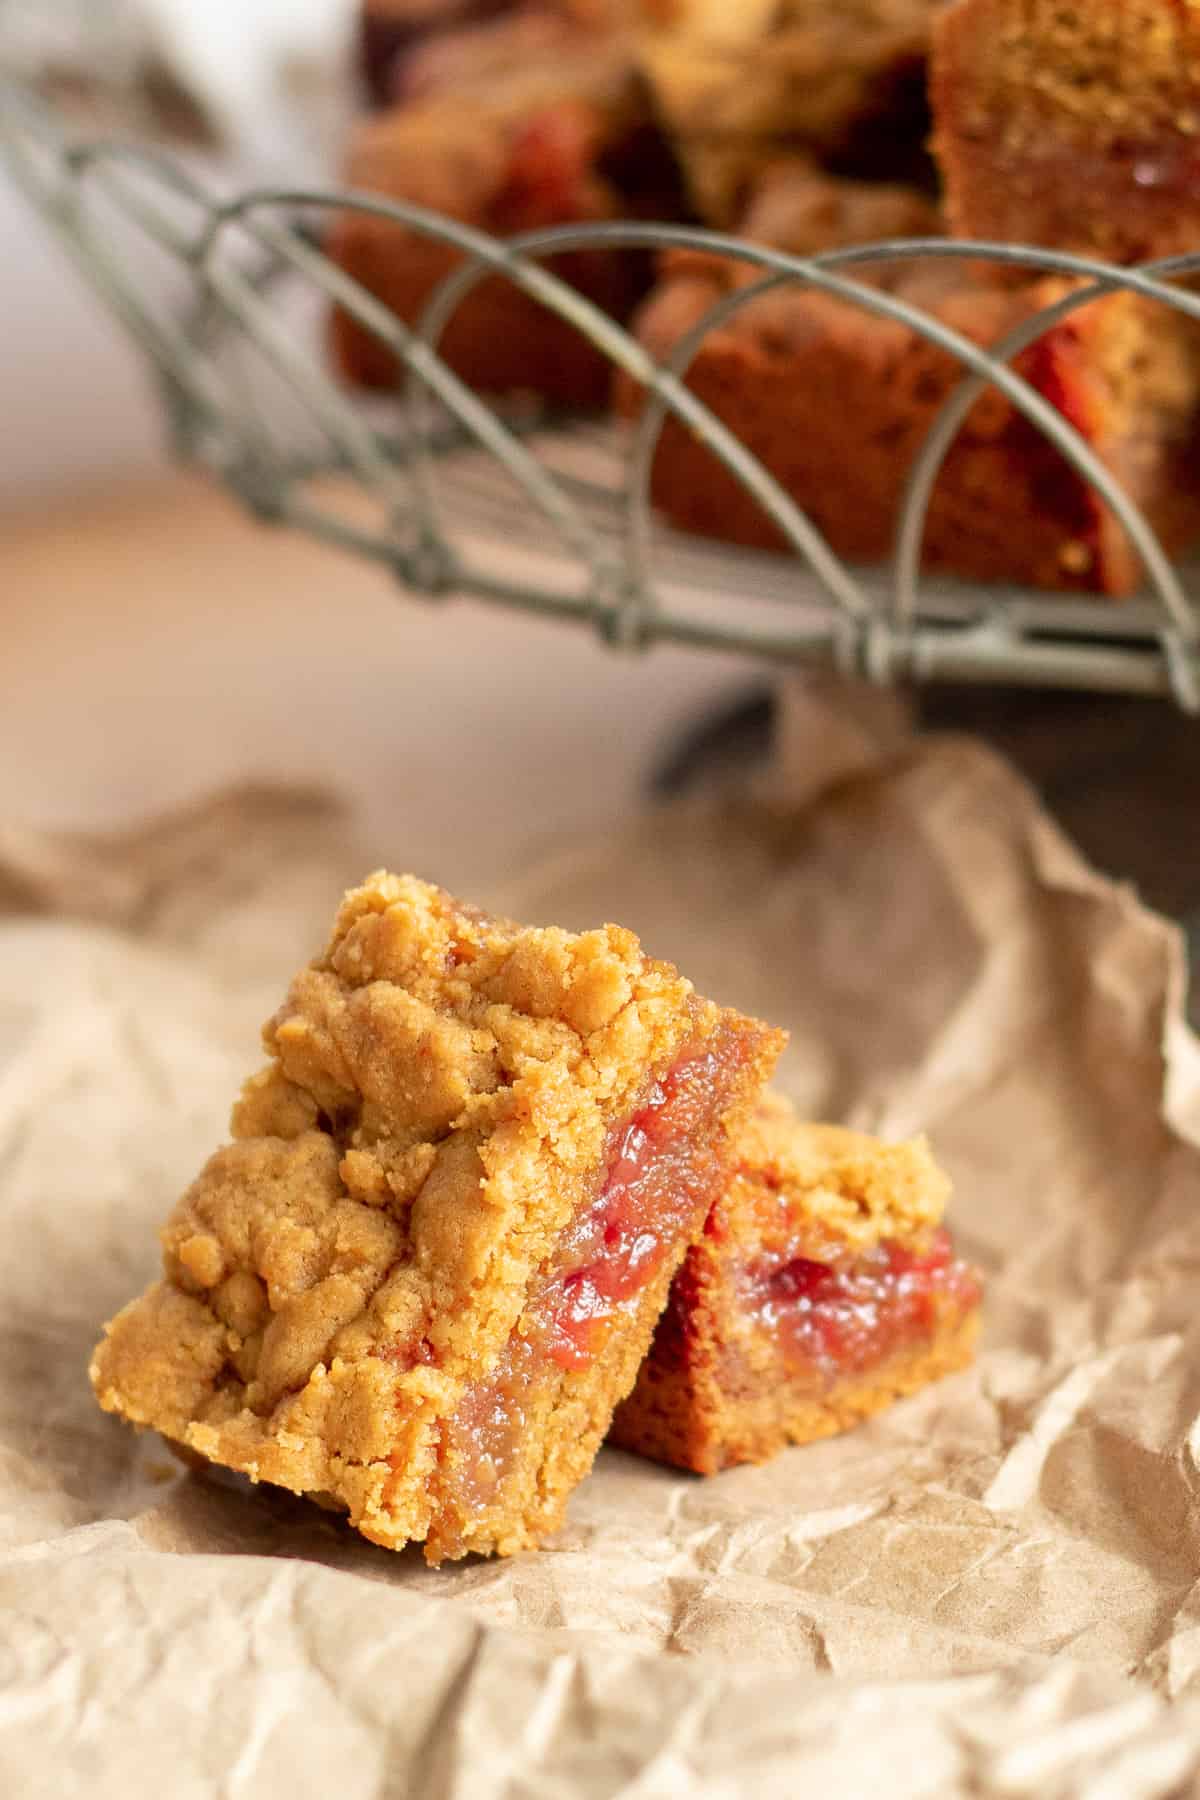 Two cookie bars are resting on a crumpled brown paper with a basket of more bars in the background.